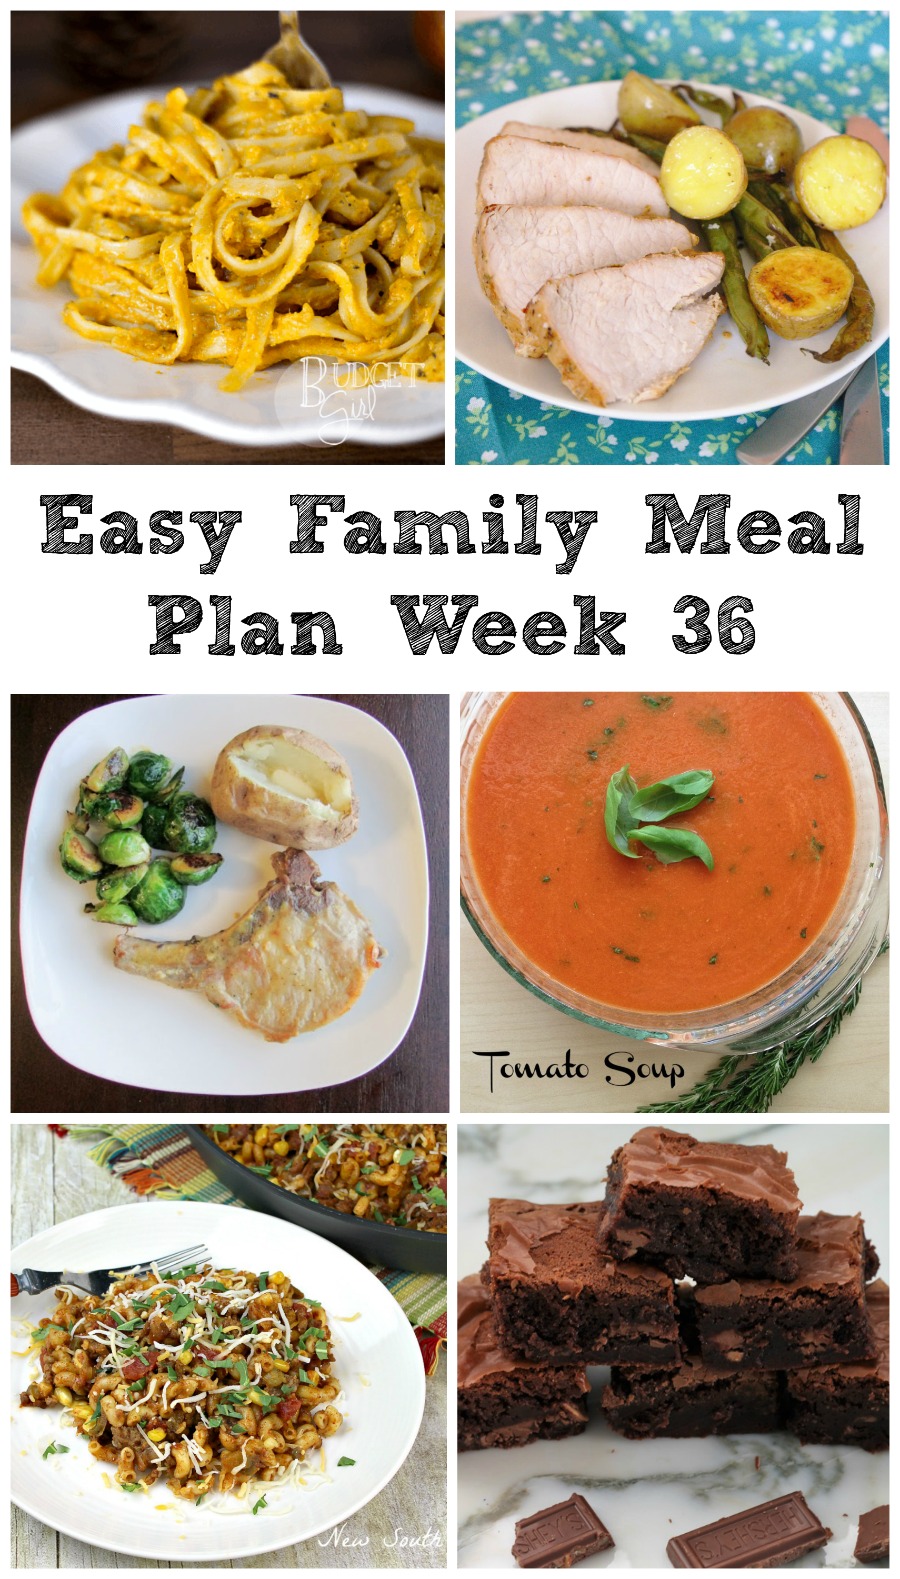 Cooking With Carlee: Easy Family Meal Plan Week 36